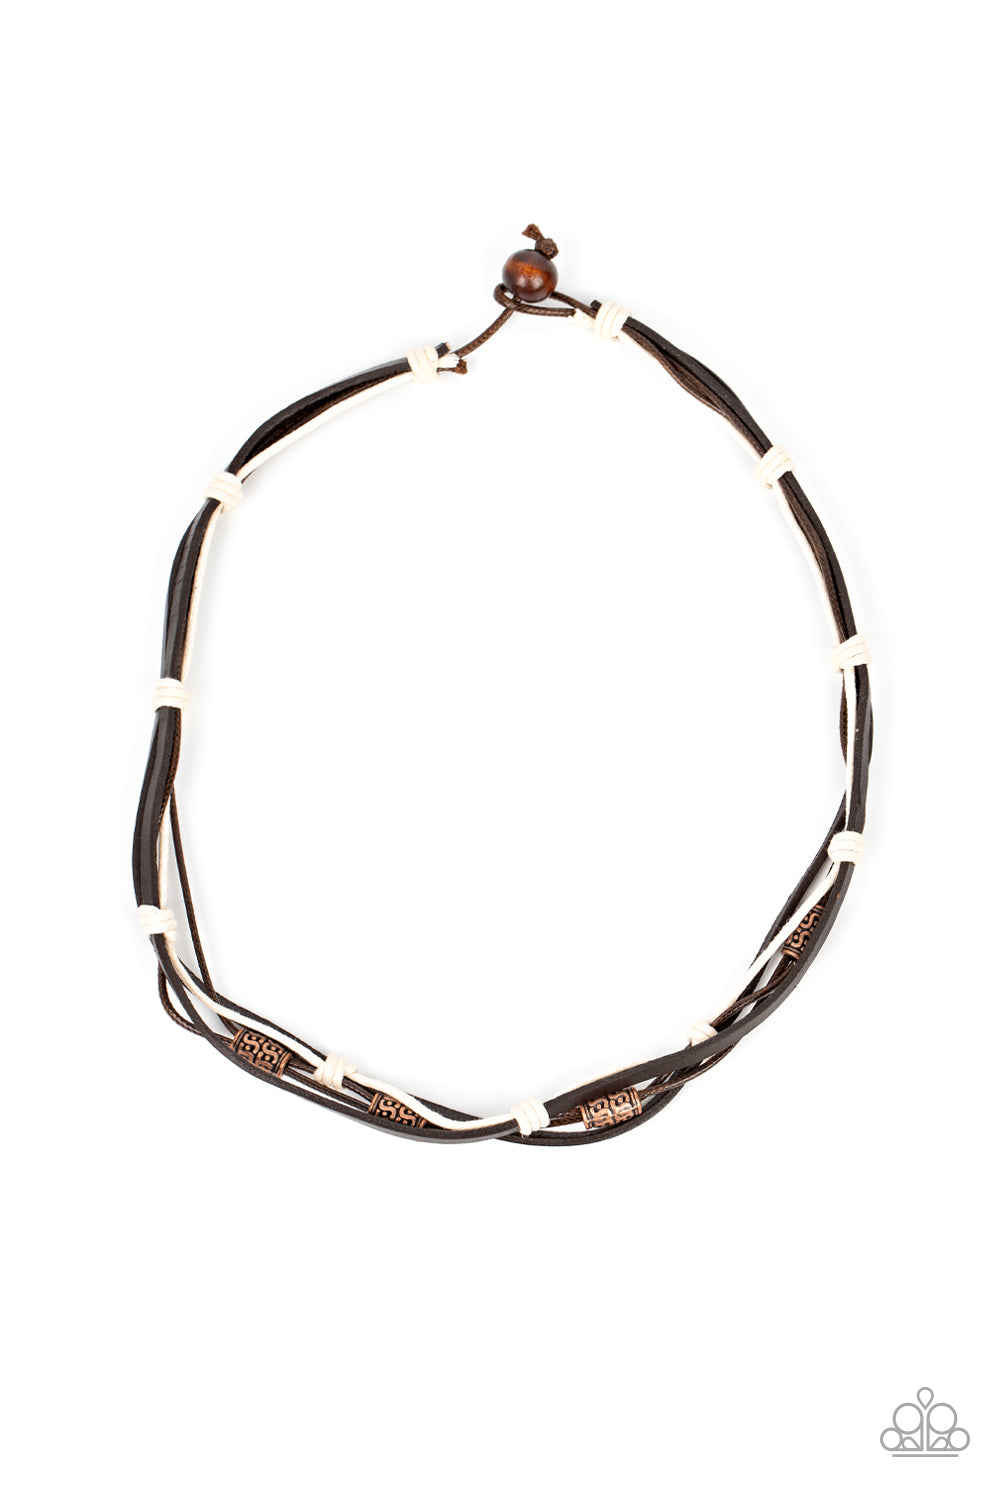 Backpack Paradise - Copper Textured Beads, Brown & White Cording Paparazzi Urban Necklace